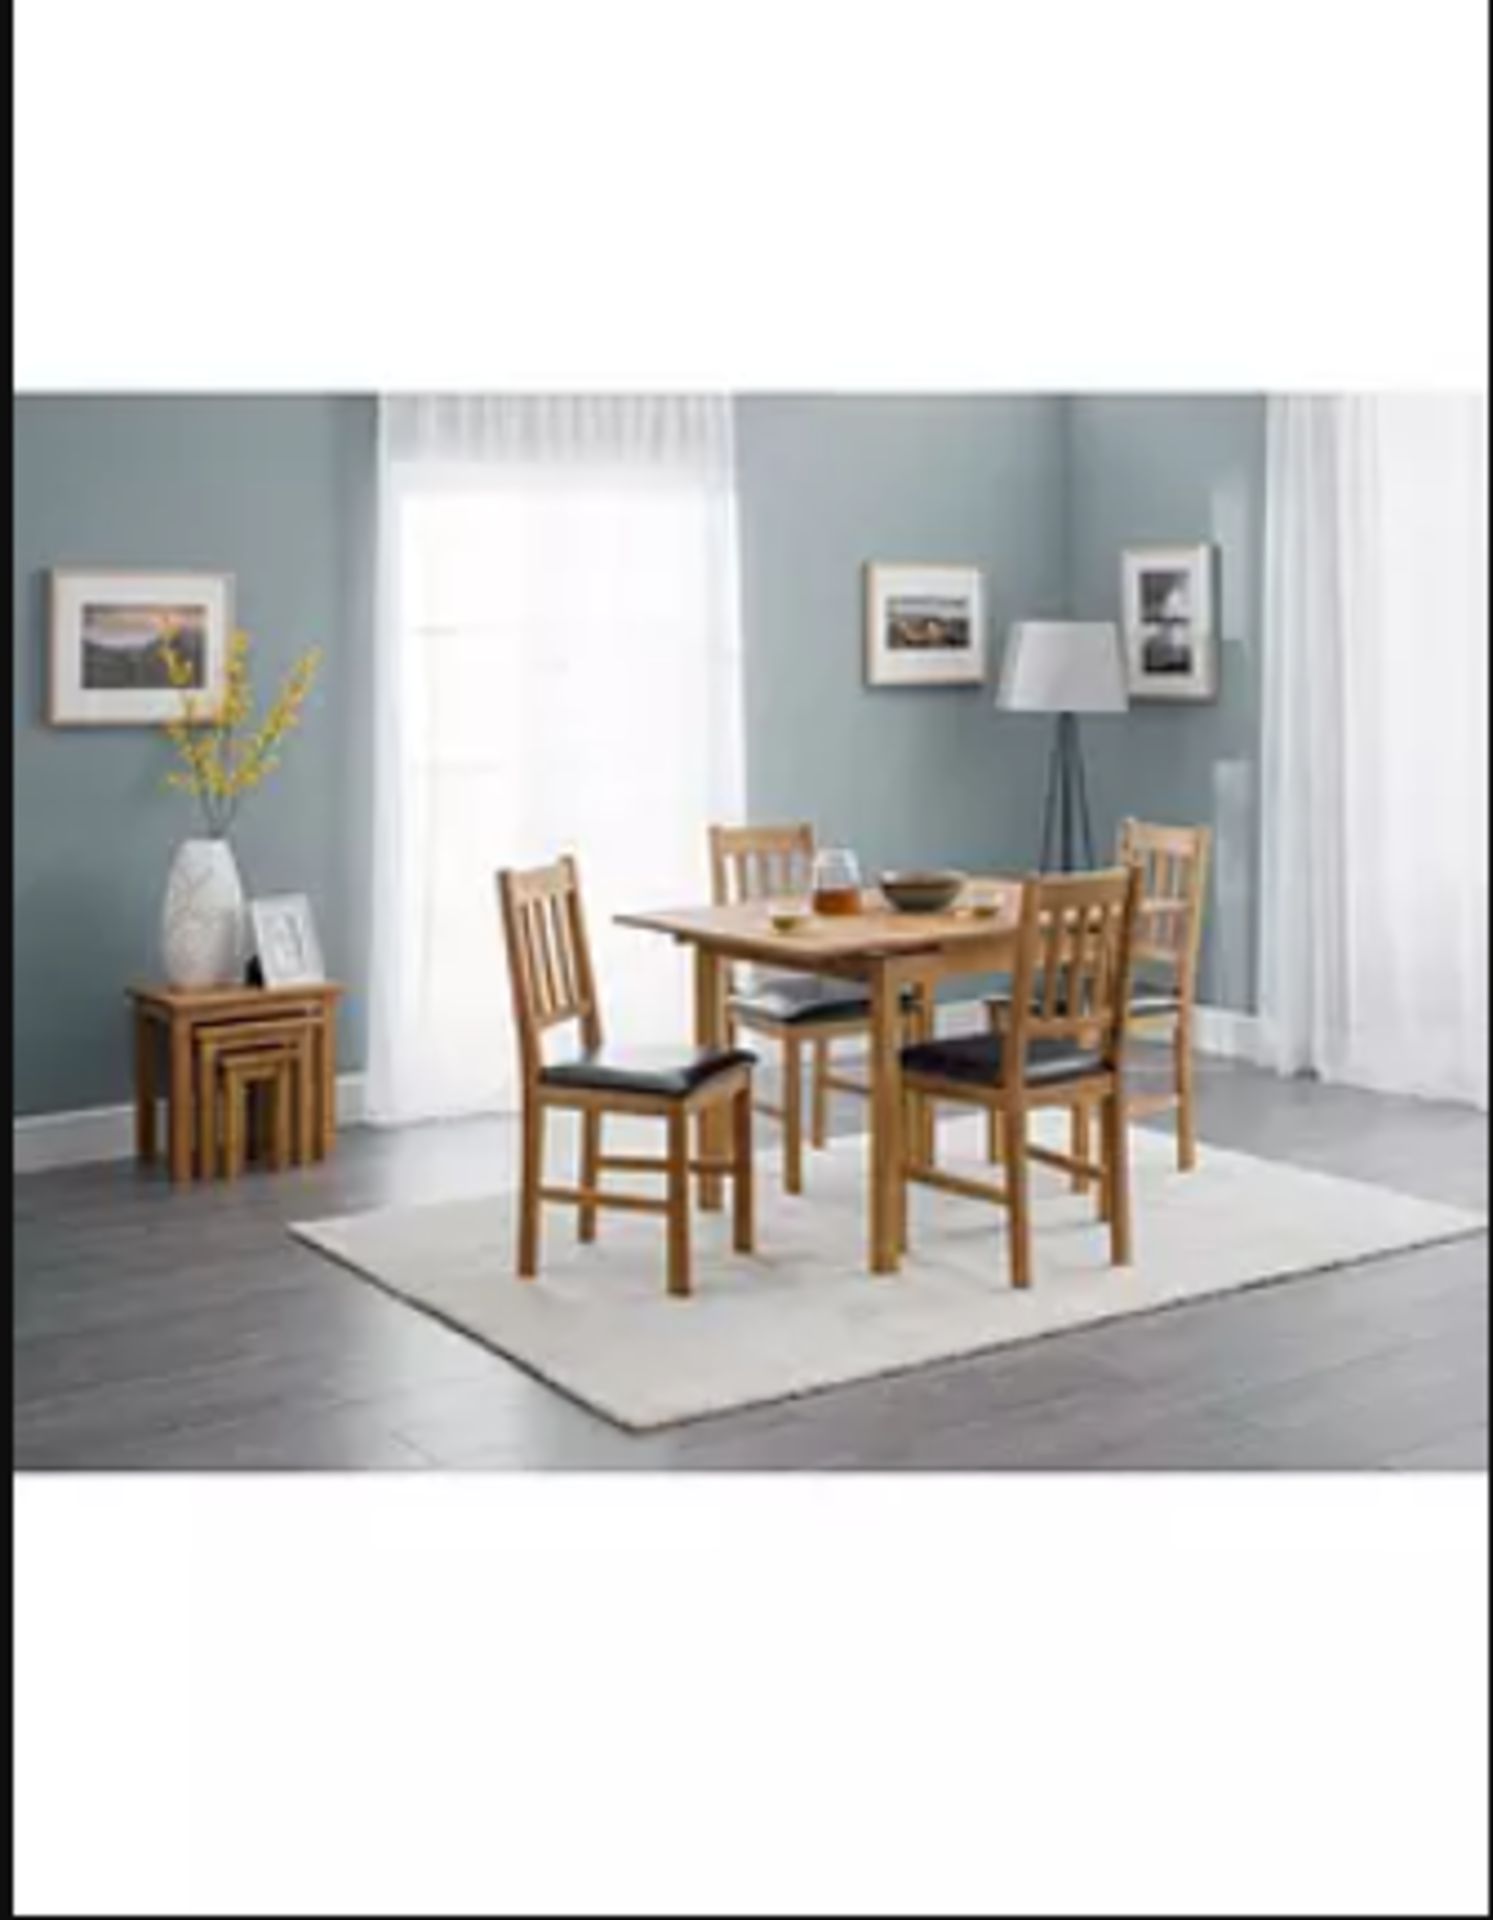 COXMOOR SET OF 2 DINING CHAIRS RRP £169 - Image 2 of 2